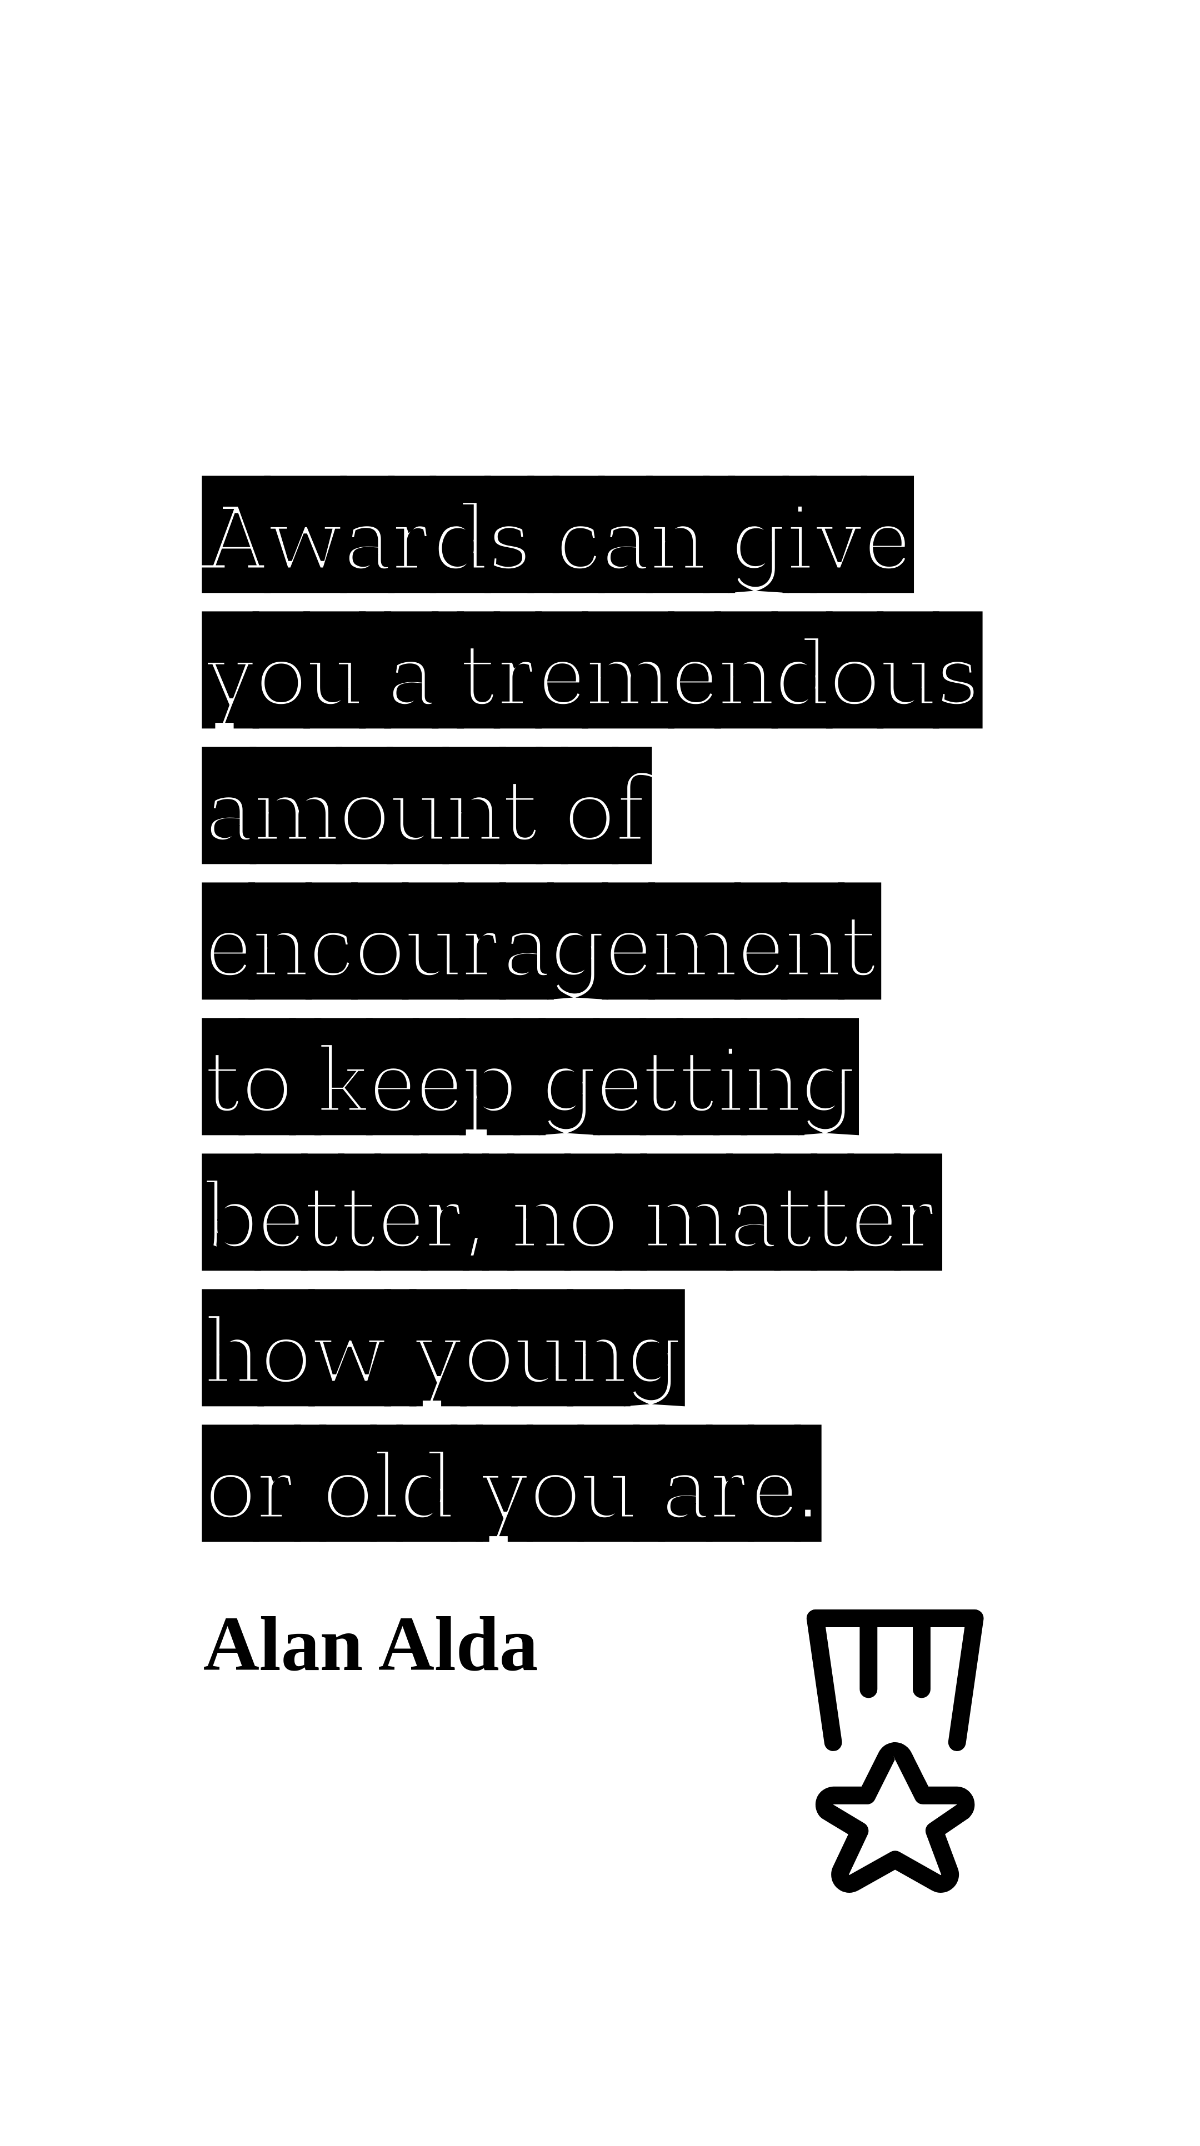 Alan Alda - Awards can give you a tremendous amount of encouragement to keep getting better, no matter how young or old you are.